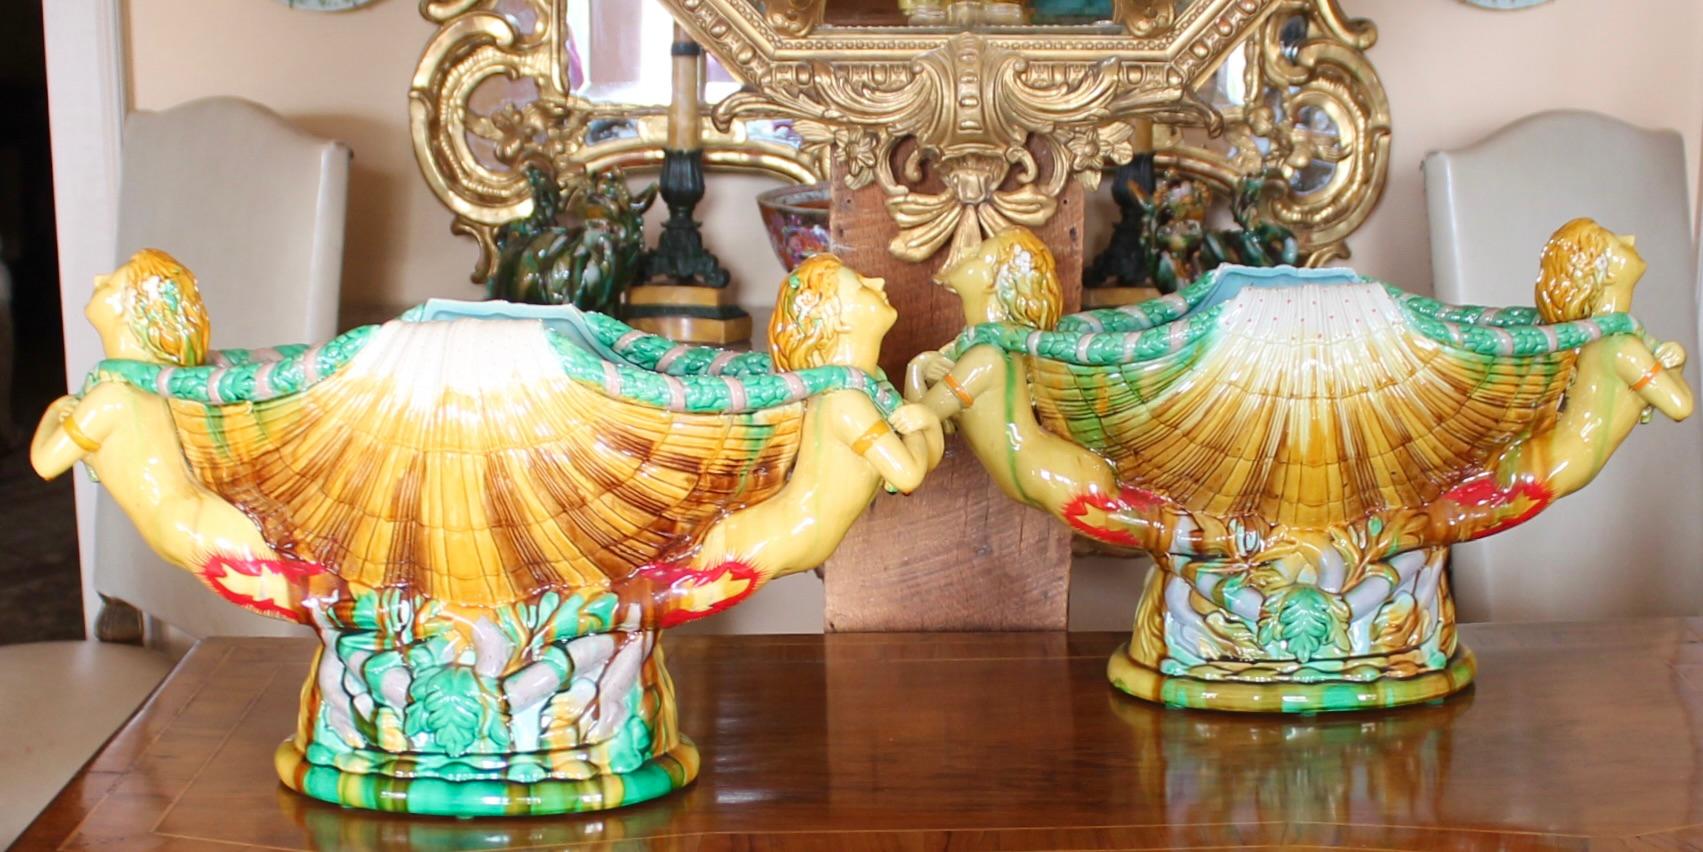 After a 19th century Minton majolica design, a fine of pair exuberantly formed  vessels, richly colored in ochre, bright green, light blue and red, the tails of the mermaids intertwine around the base of the composition. The seashell is multihued